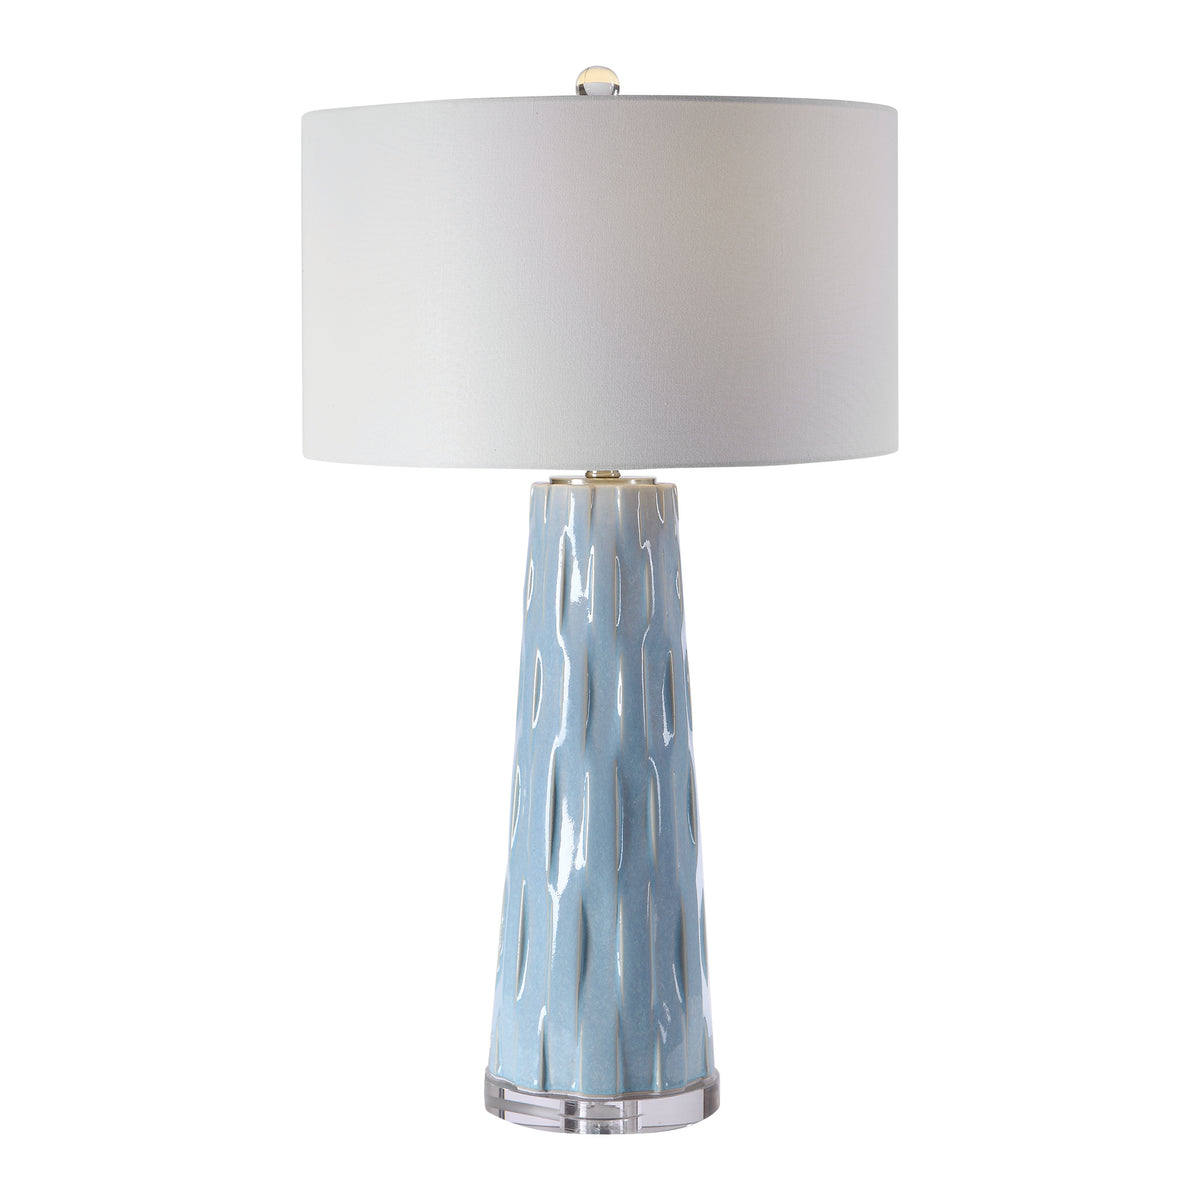 Brienne Table Lamp